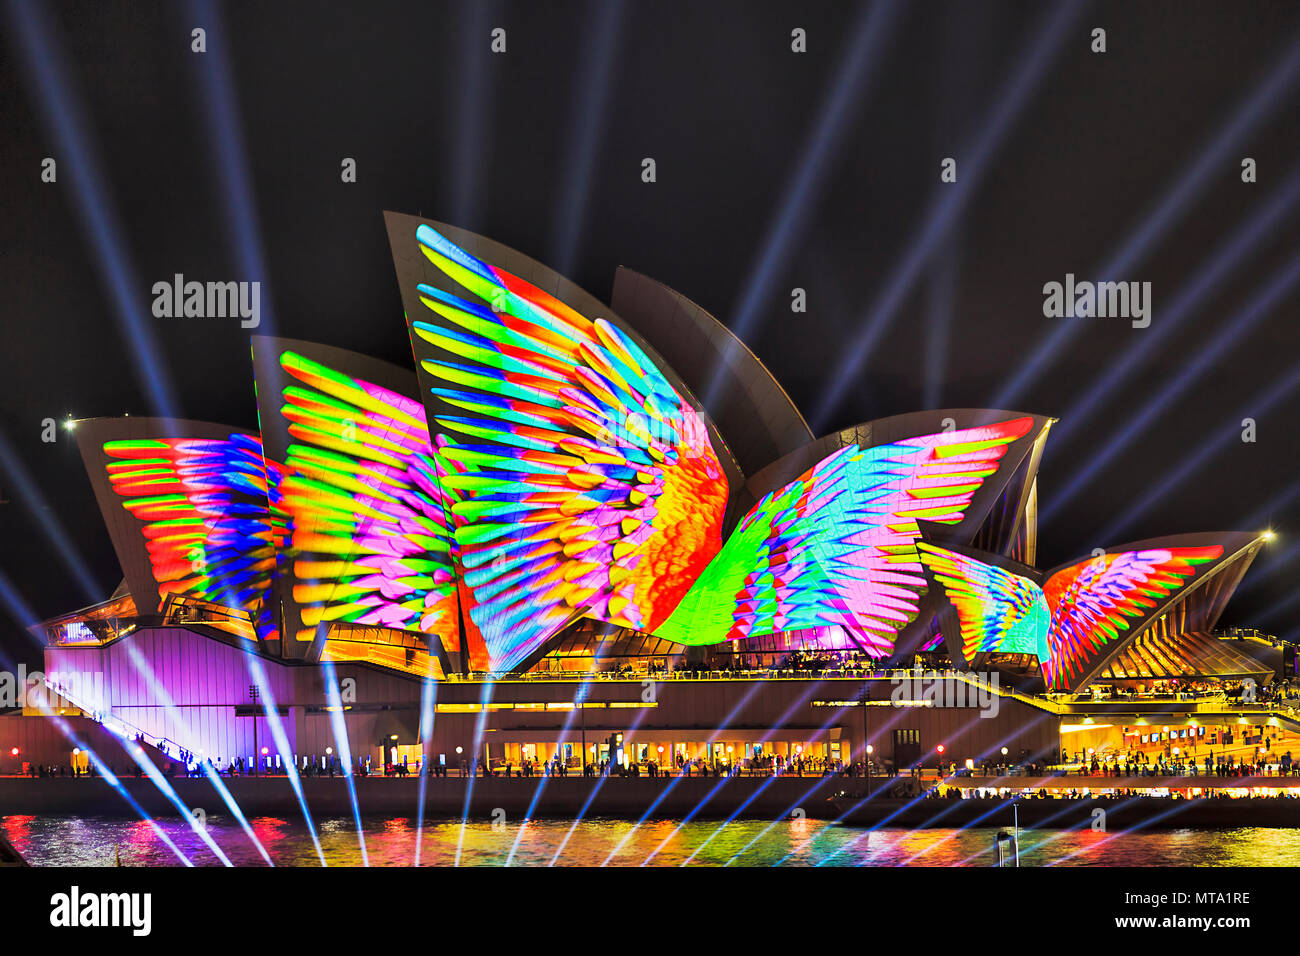 Sydney, Australia - 25 May, 2018: Sydney city landmark of Sydney Opera House at harbour waterfront during annual light show of music, light and ideas  Stock Photo